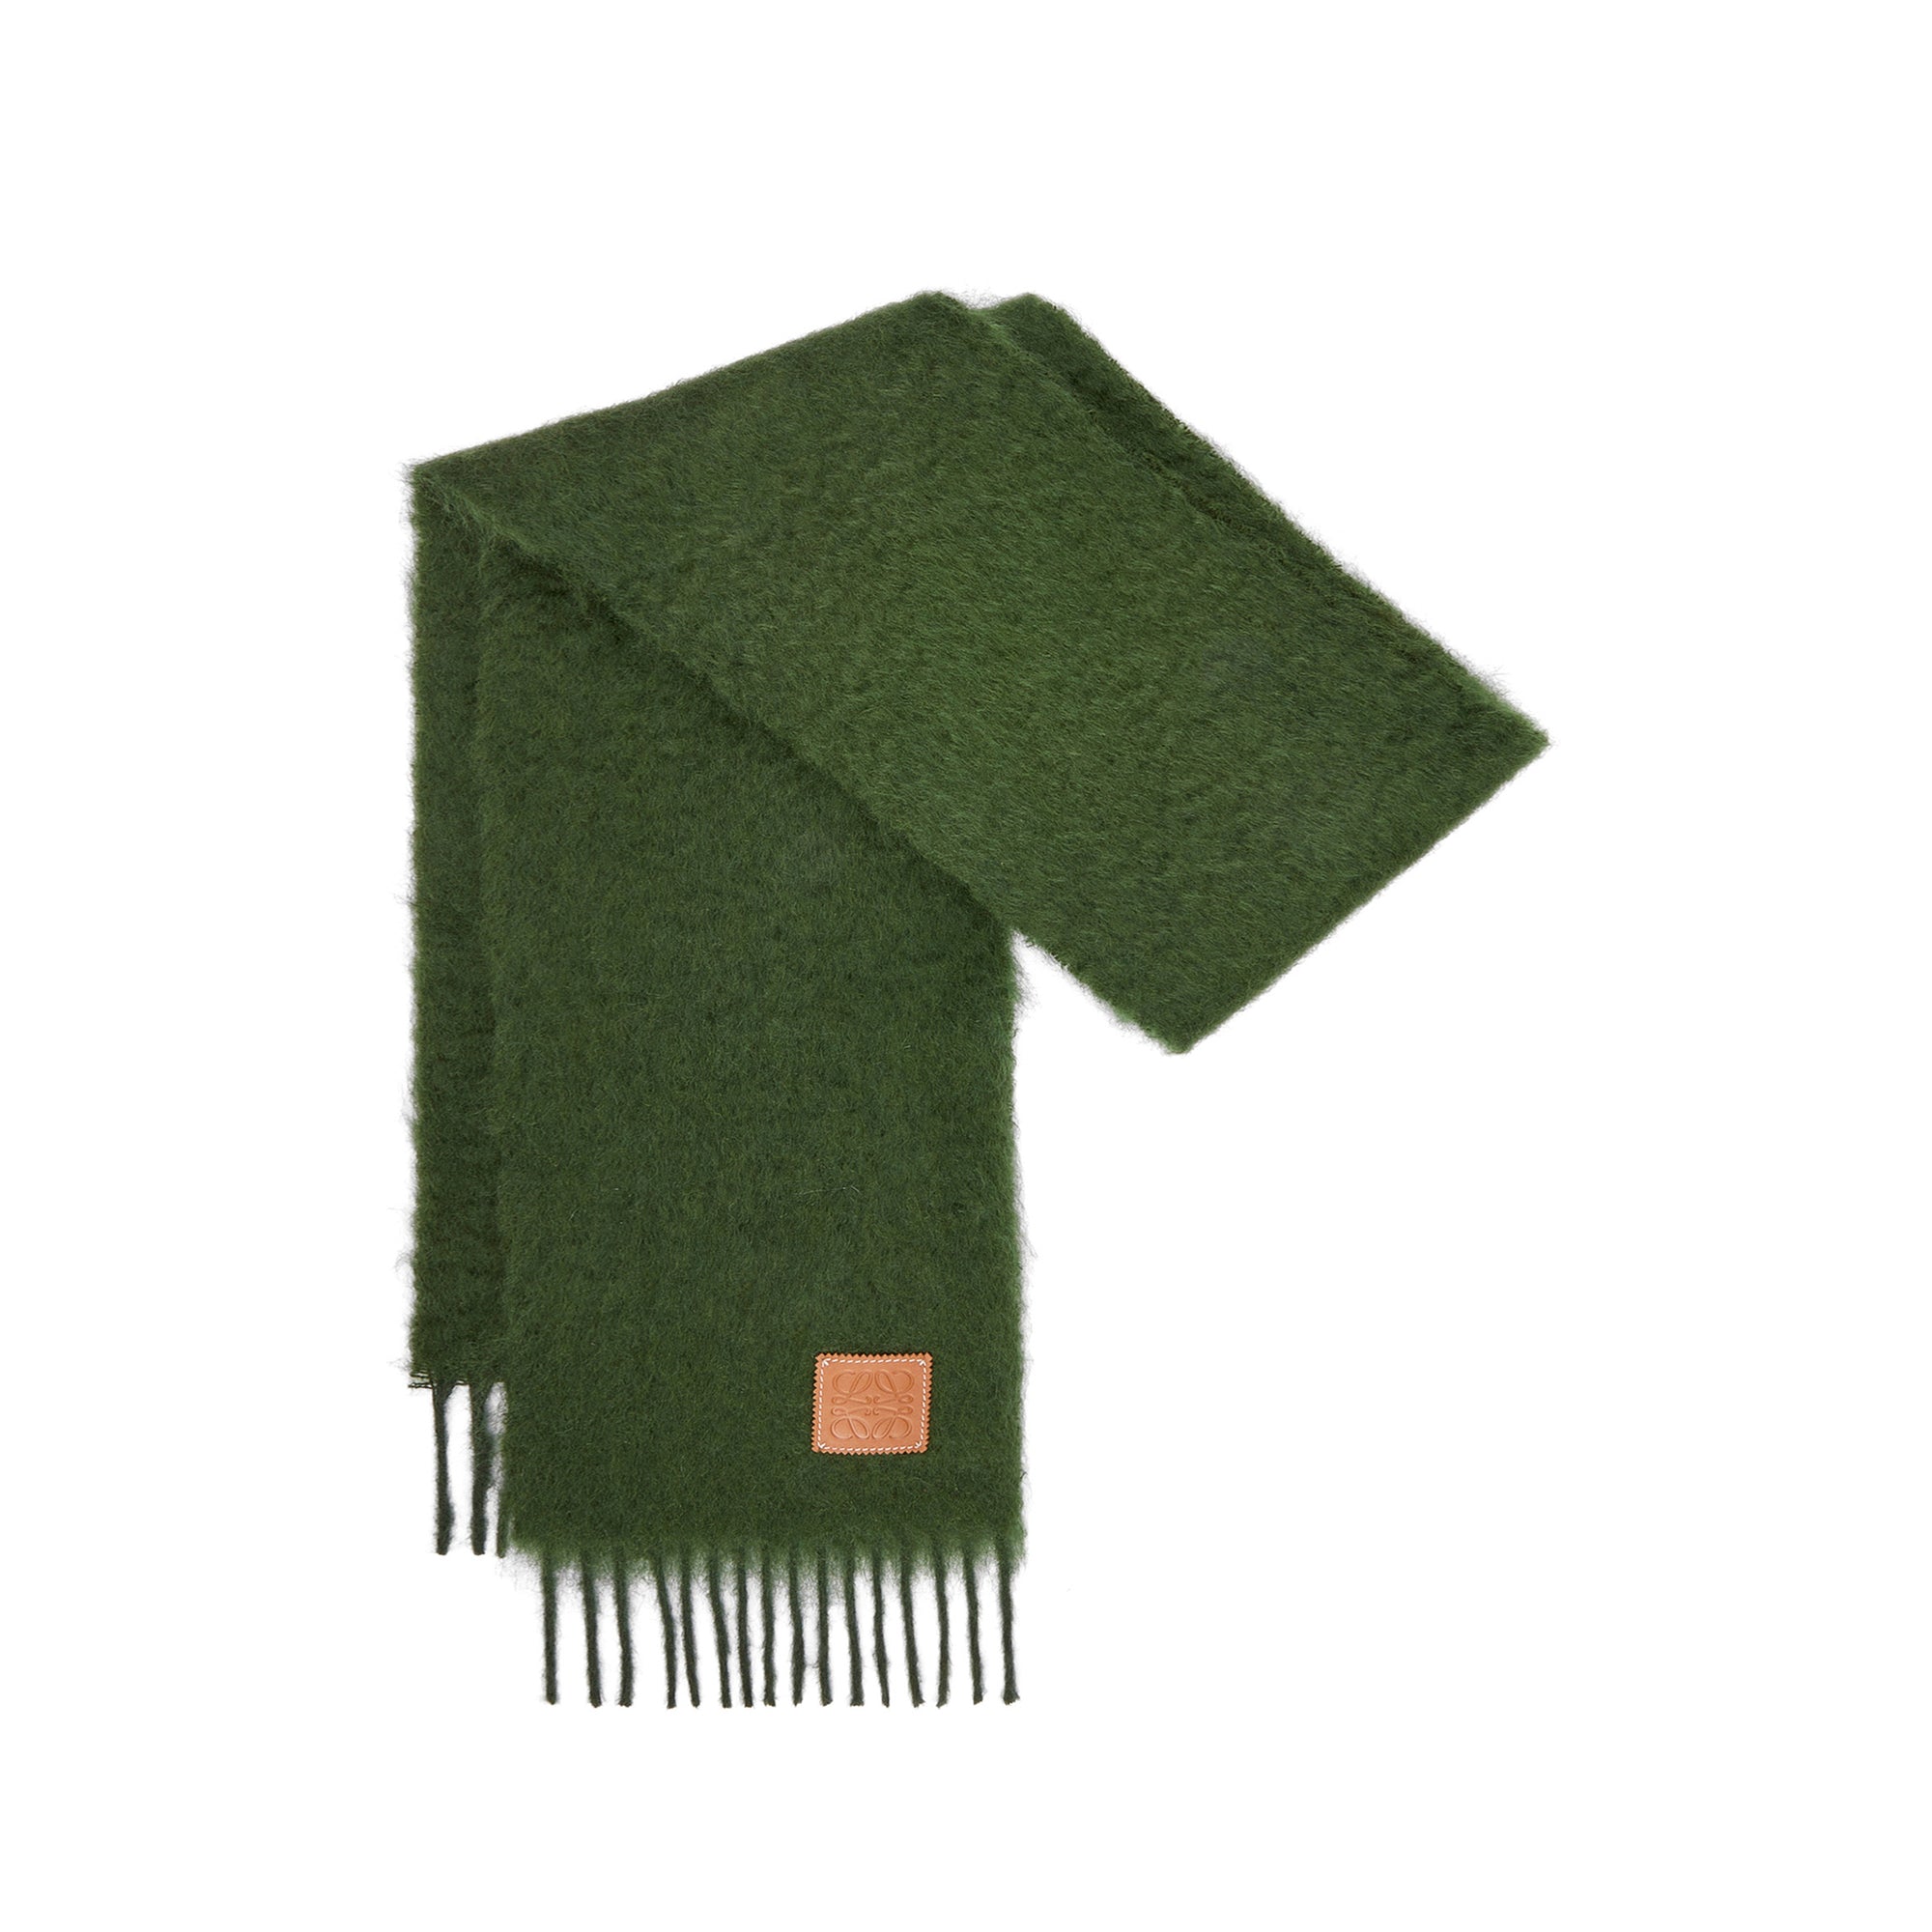 Loewe - Women's Scarf - (Forest Green) view 2